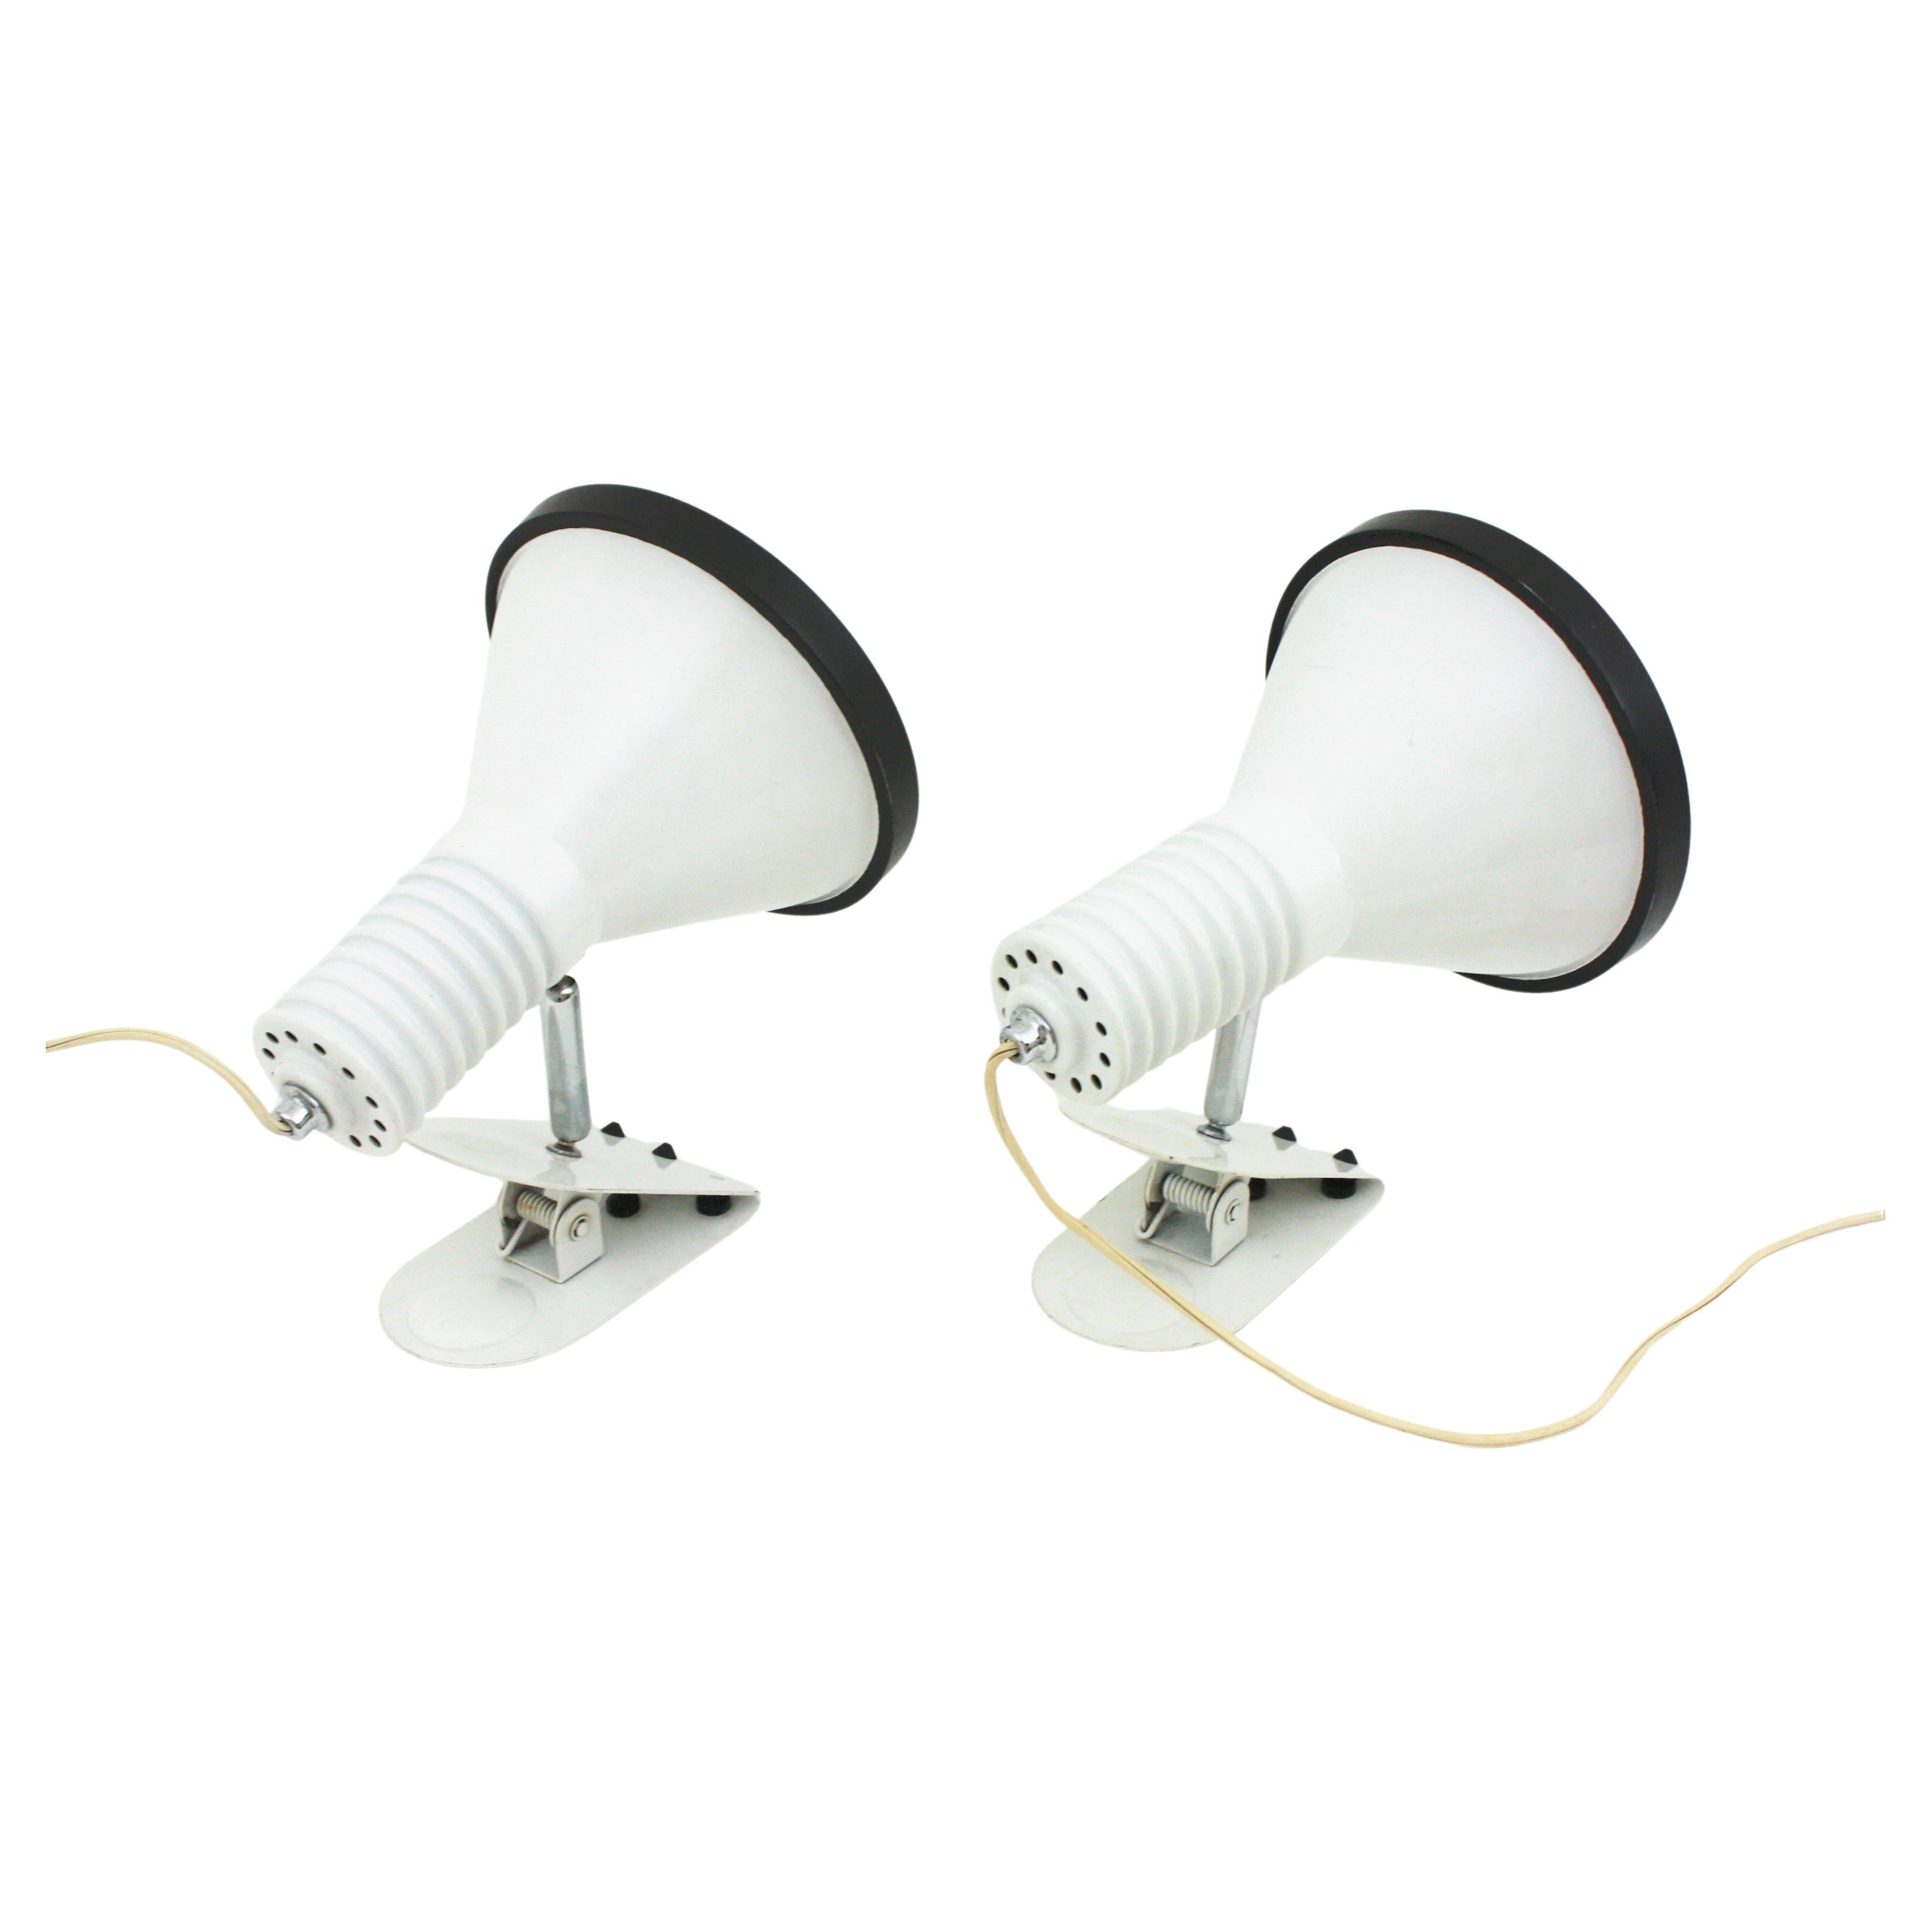 Spanish Pair of Miguel Milá Tramo Table or Wall Clamp Lamps For Sale